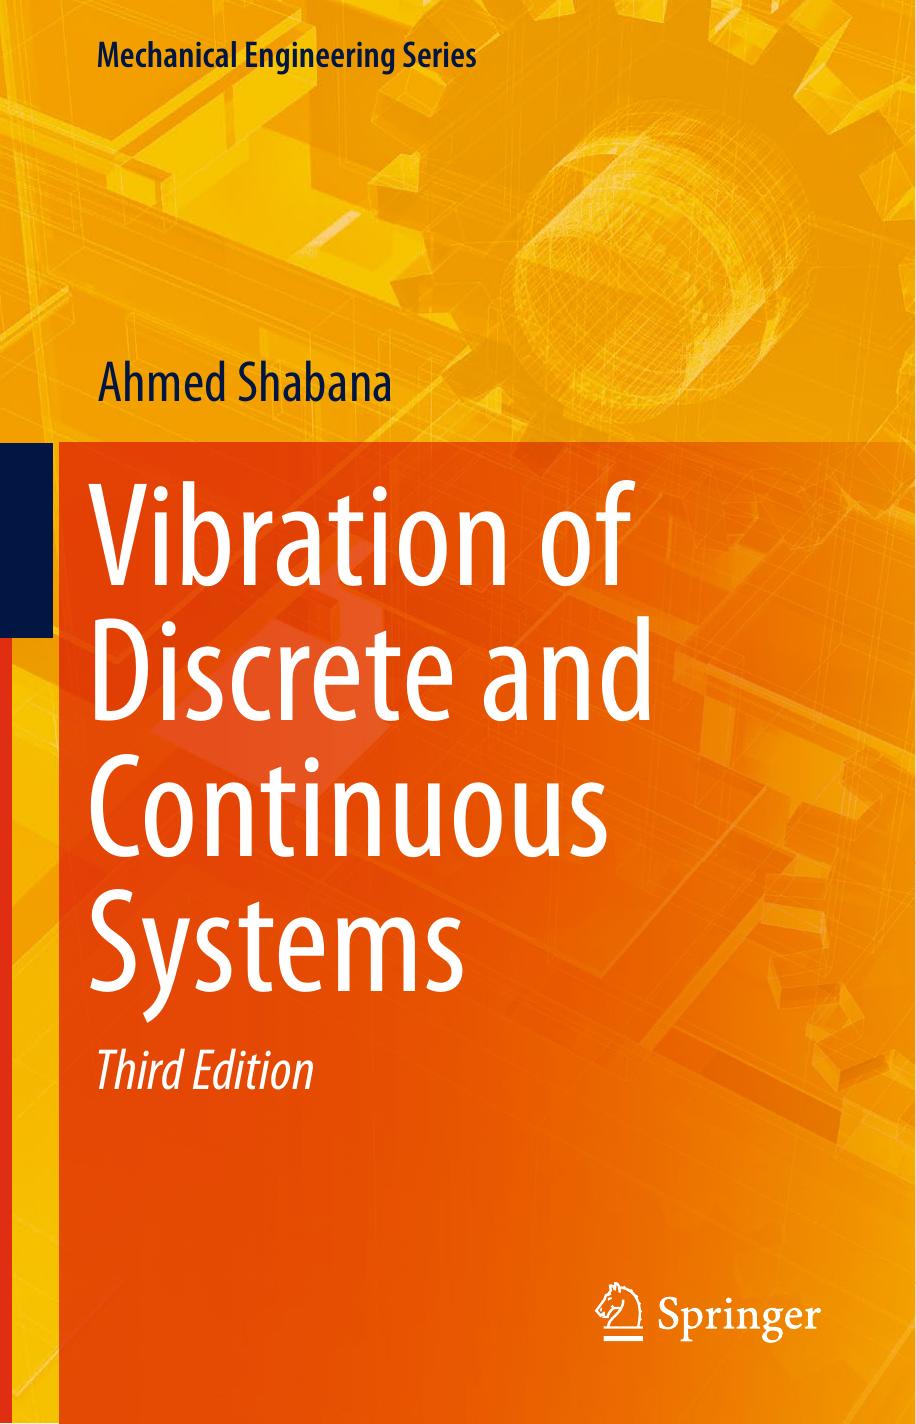 Vibration of Discrete and Continuous Systems by Ahmed Shabana